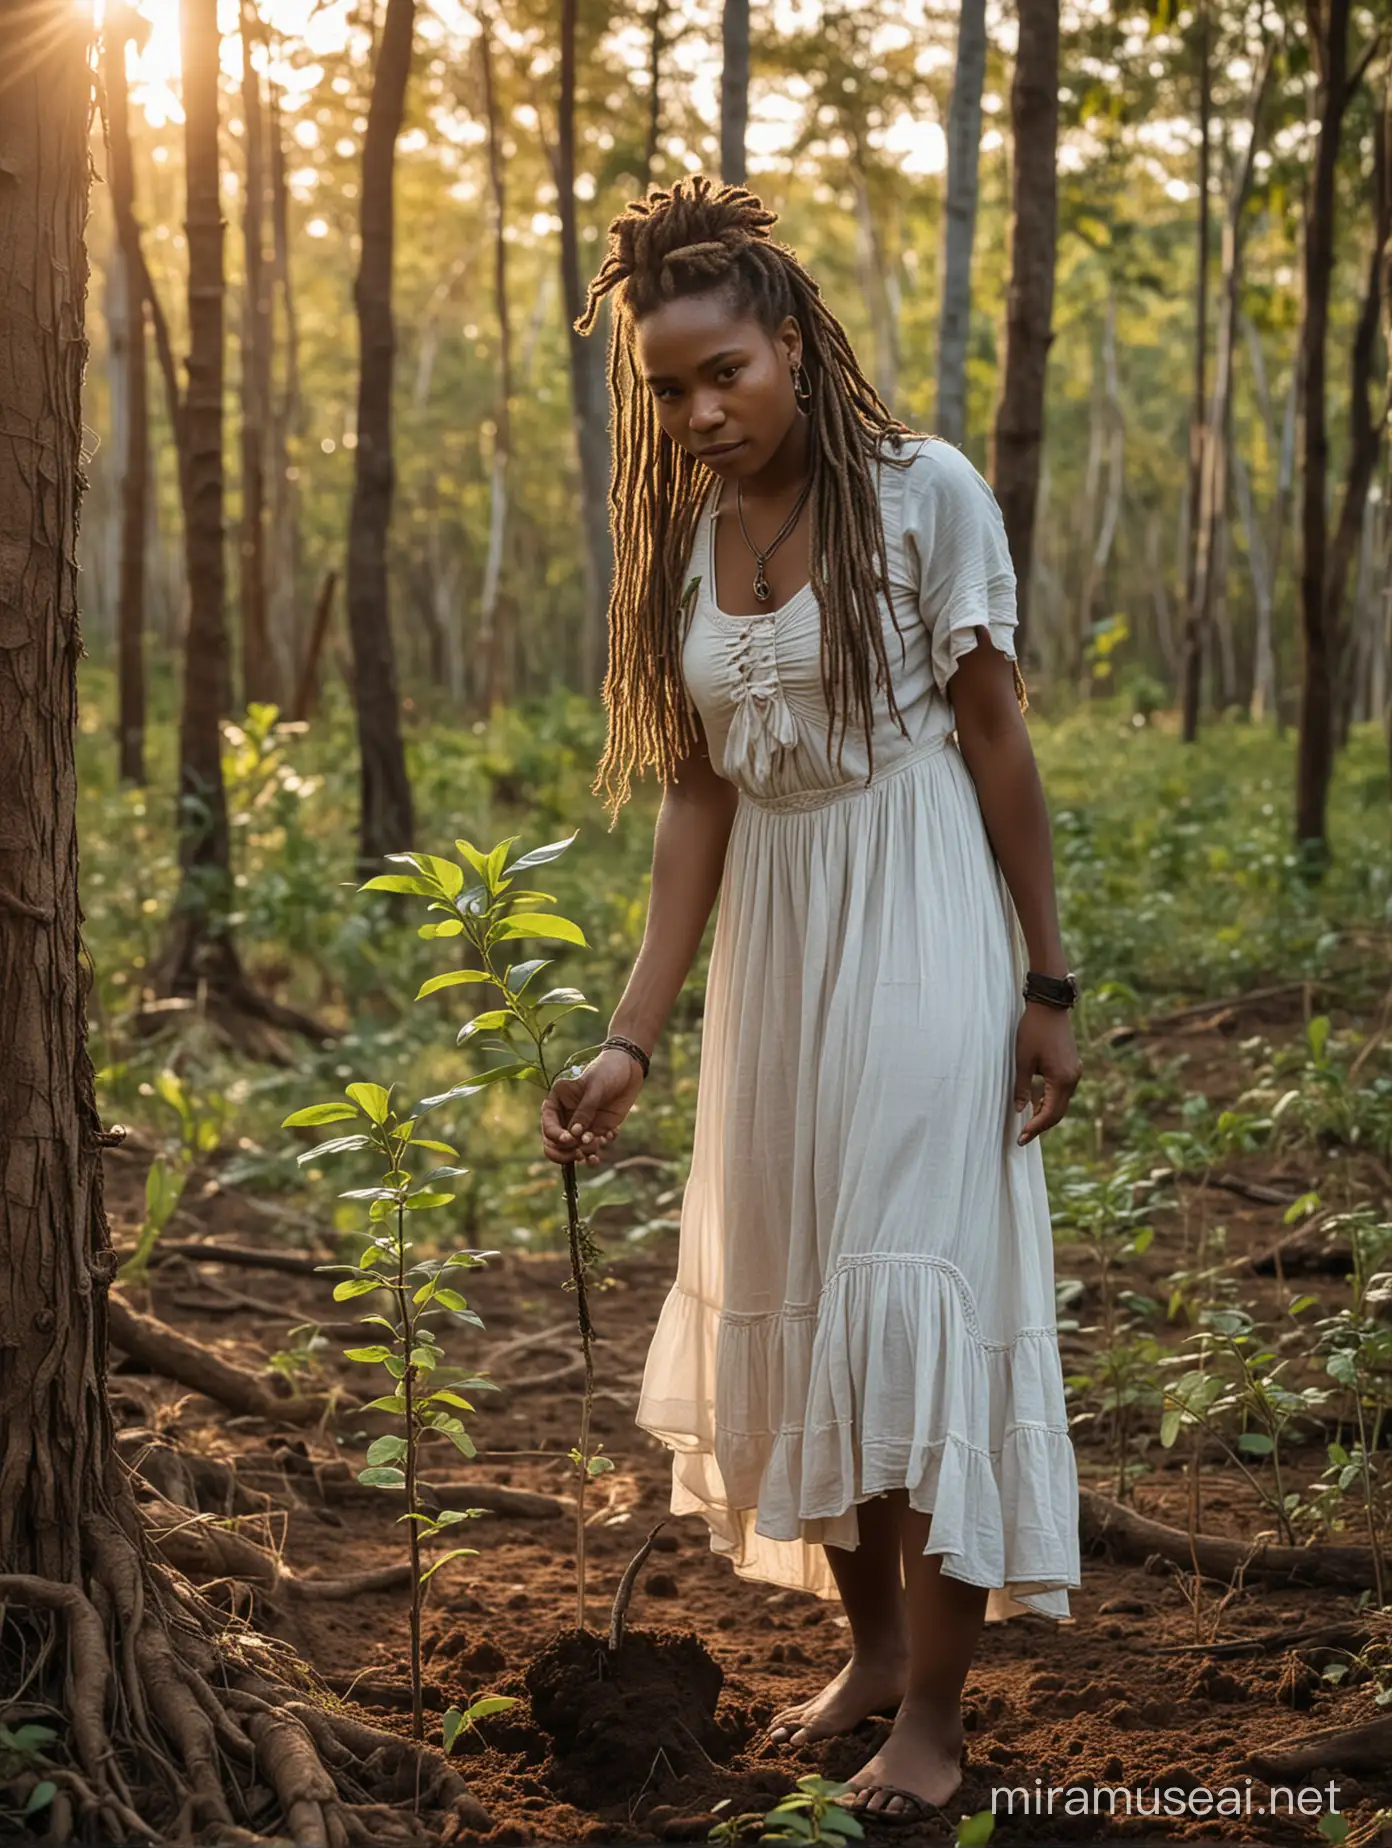 A woman from Papua, beautiful with white skin and dreadlocks wearing a simple dress, was planting trees in a beautiful forest at sunset